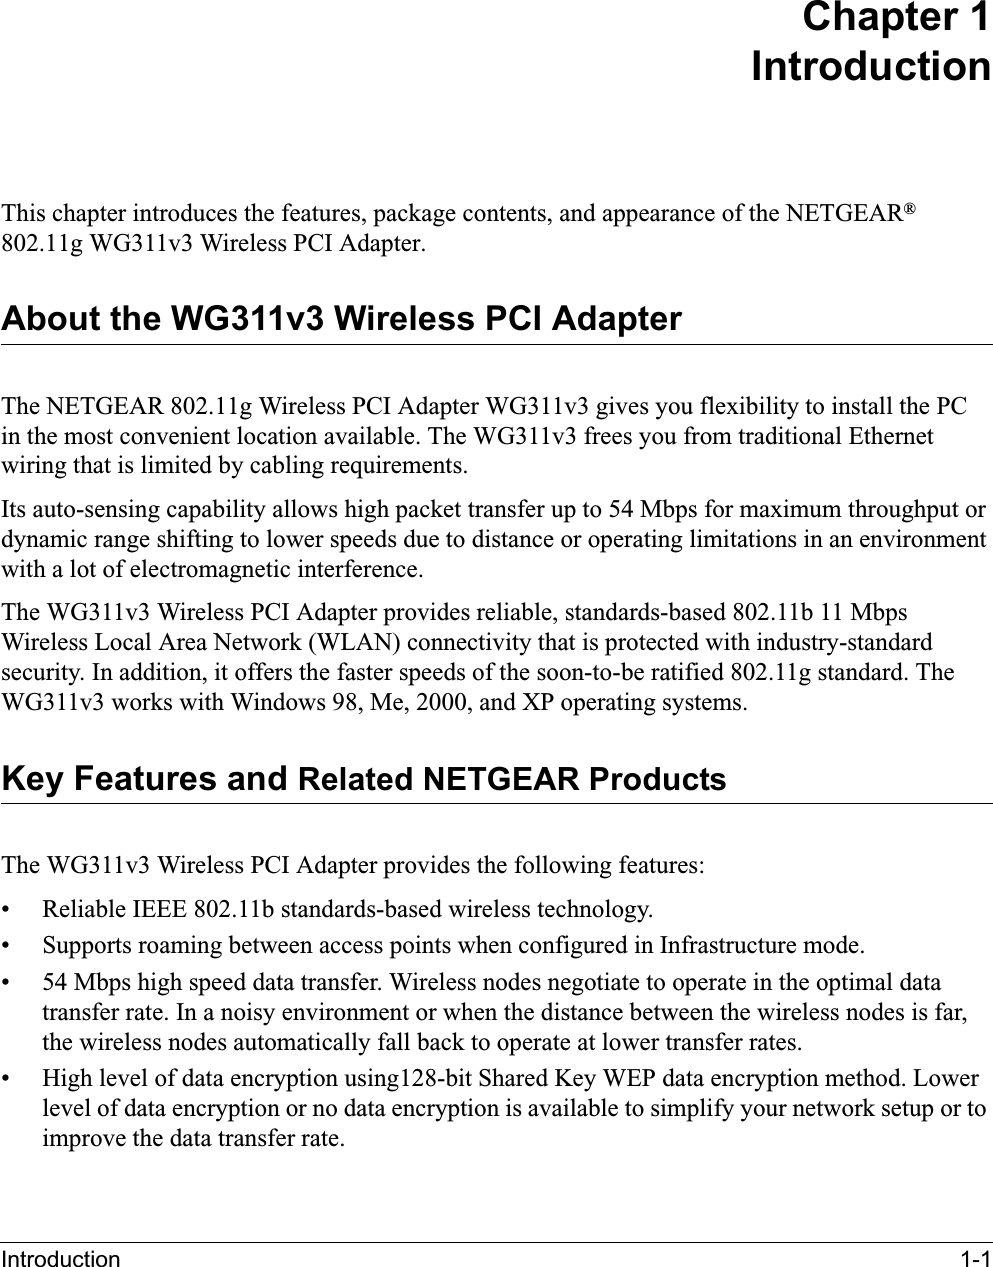 Introduction 1-1Chapter 1IntroductionThis chapter introduces the features, package contents, and appearance of the NETGEAR®802.11g WG311v3 Wireless PCI Adapter.About the WG311v3 Wireless PCI AdapterThe NETGEAR 802.11g Wireless PCI Adapter WG311v3 gives you flexibility to install the PCin the most convenient location available. The WG311v3 frees you from traditional Ethernetwiring that is limited by cabling requirements. Its auto-sensing capability allows high packet transfer up to 54 Mbps for maximum throughput or dynamic range shifting to lower speeds due to distance or operating limitations in an environment with a lot of electromagnetic interference.The WG311v3 Wireless PCI Adapter provides reliable, standards-based 802.11b 11 MbpsWireless Local Area Network (WLAN) connectivity that is protected with industry-standard security. In addition, it offers the faster speeds of the soon-to-be ratified 802.11g standard. The WG311v3 works with Windows 98, Me, 2000, and XP operating systems.Key Features and Related NETGEAR ProductsThe WG311v3 Wireless PCI Adapter provides the following features:• Reliable IEEE 802.11b standards-based wireless technology.• Supports roaming between access points when configured in Infrastructure mode.• 54 Mbps high speed data transfer. Wireless nodes negotiate to operate in the optimal data transfer rate. In a noisy environment or when the distance between the wireless nodes is far, the wireless nodes automatically fall back to operate at lower transfer rates.• High level of data encryption using128-bit Shared Key WEP data encryption method. Lower level of data encryption or no data encryption is available to simplify your network setup or to improve the data transfer rate.